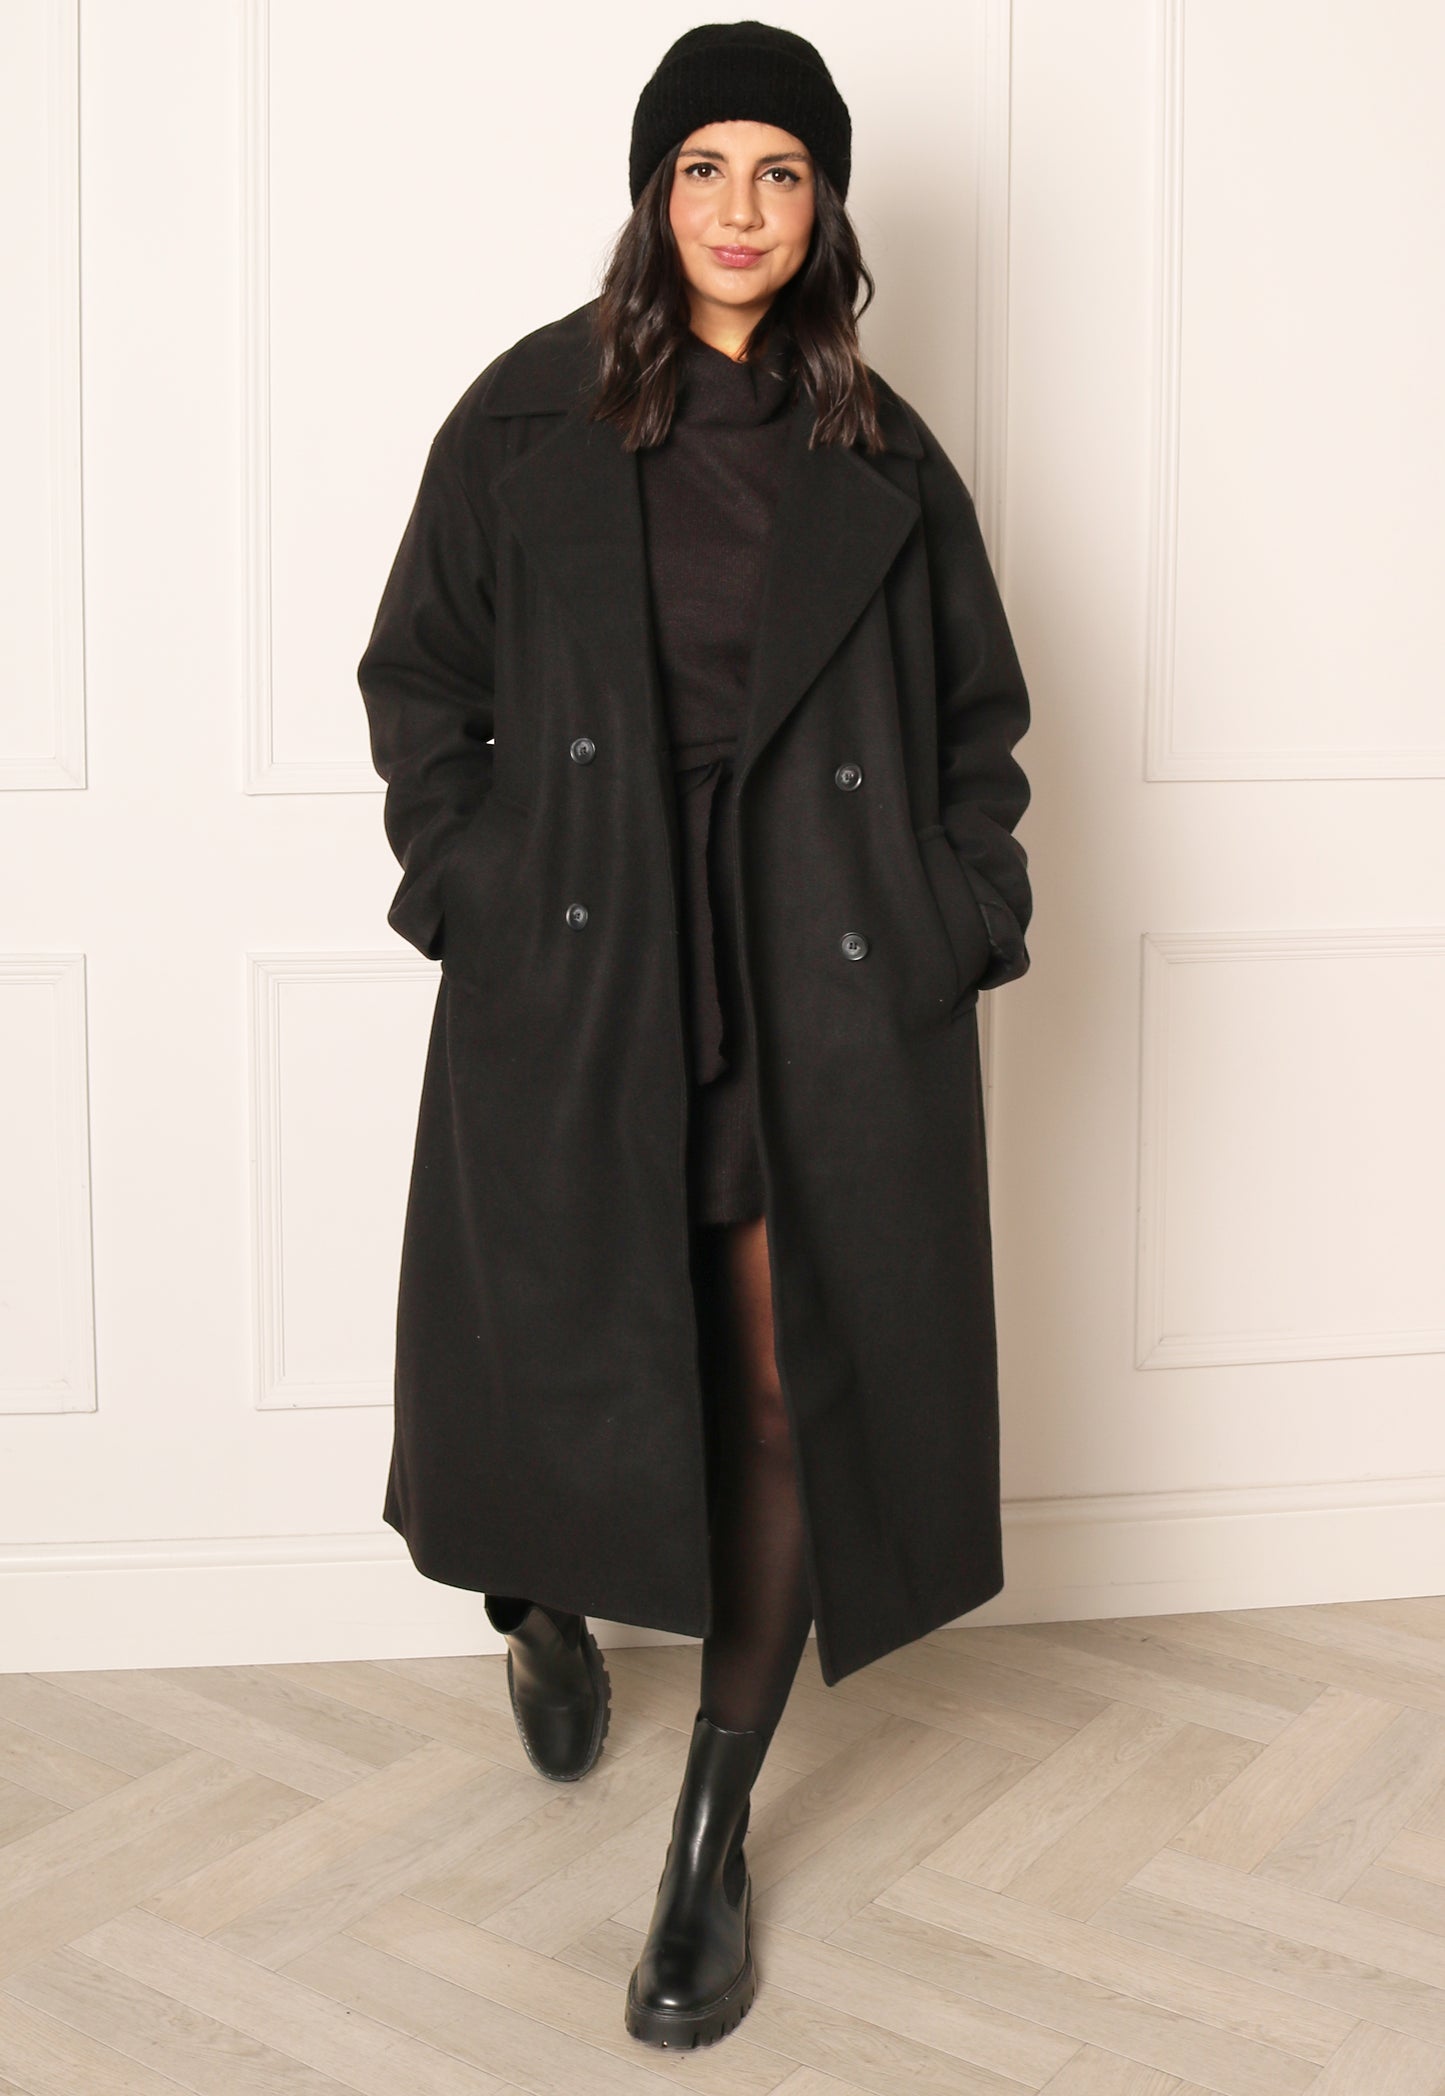 ONLY Wembley Oversized Double Breasted Longline Wool Style Trench Coat in Black - One Nation Clothing